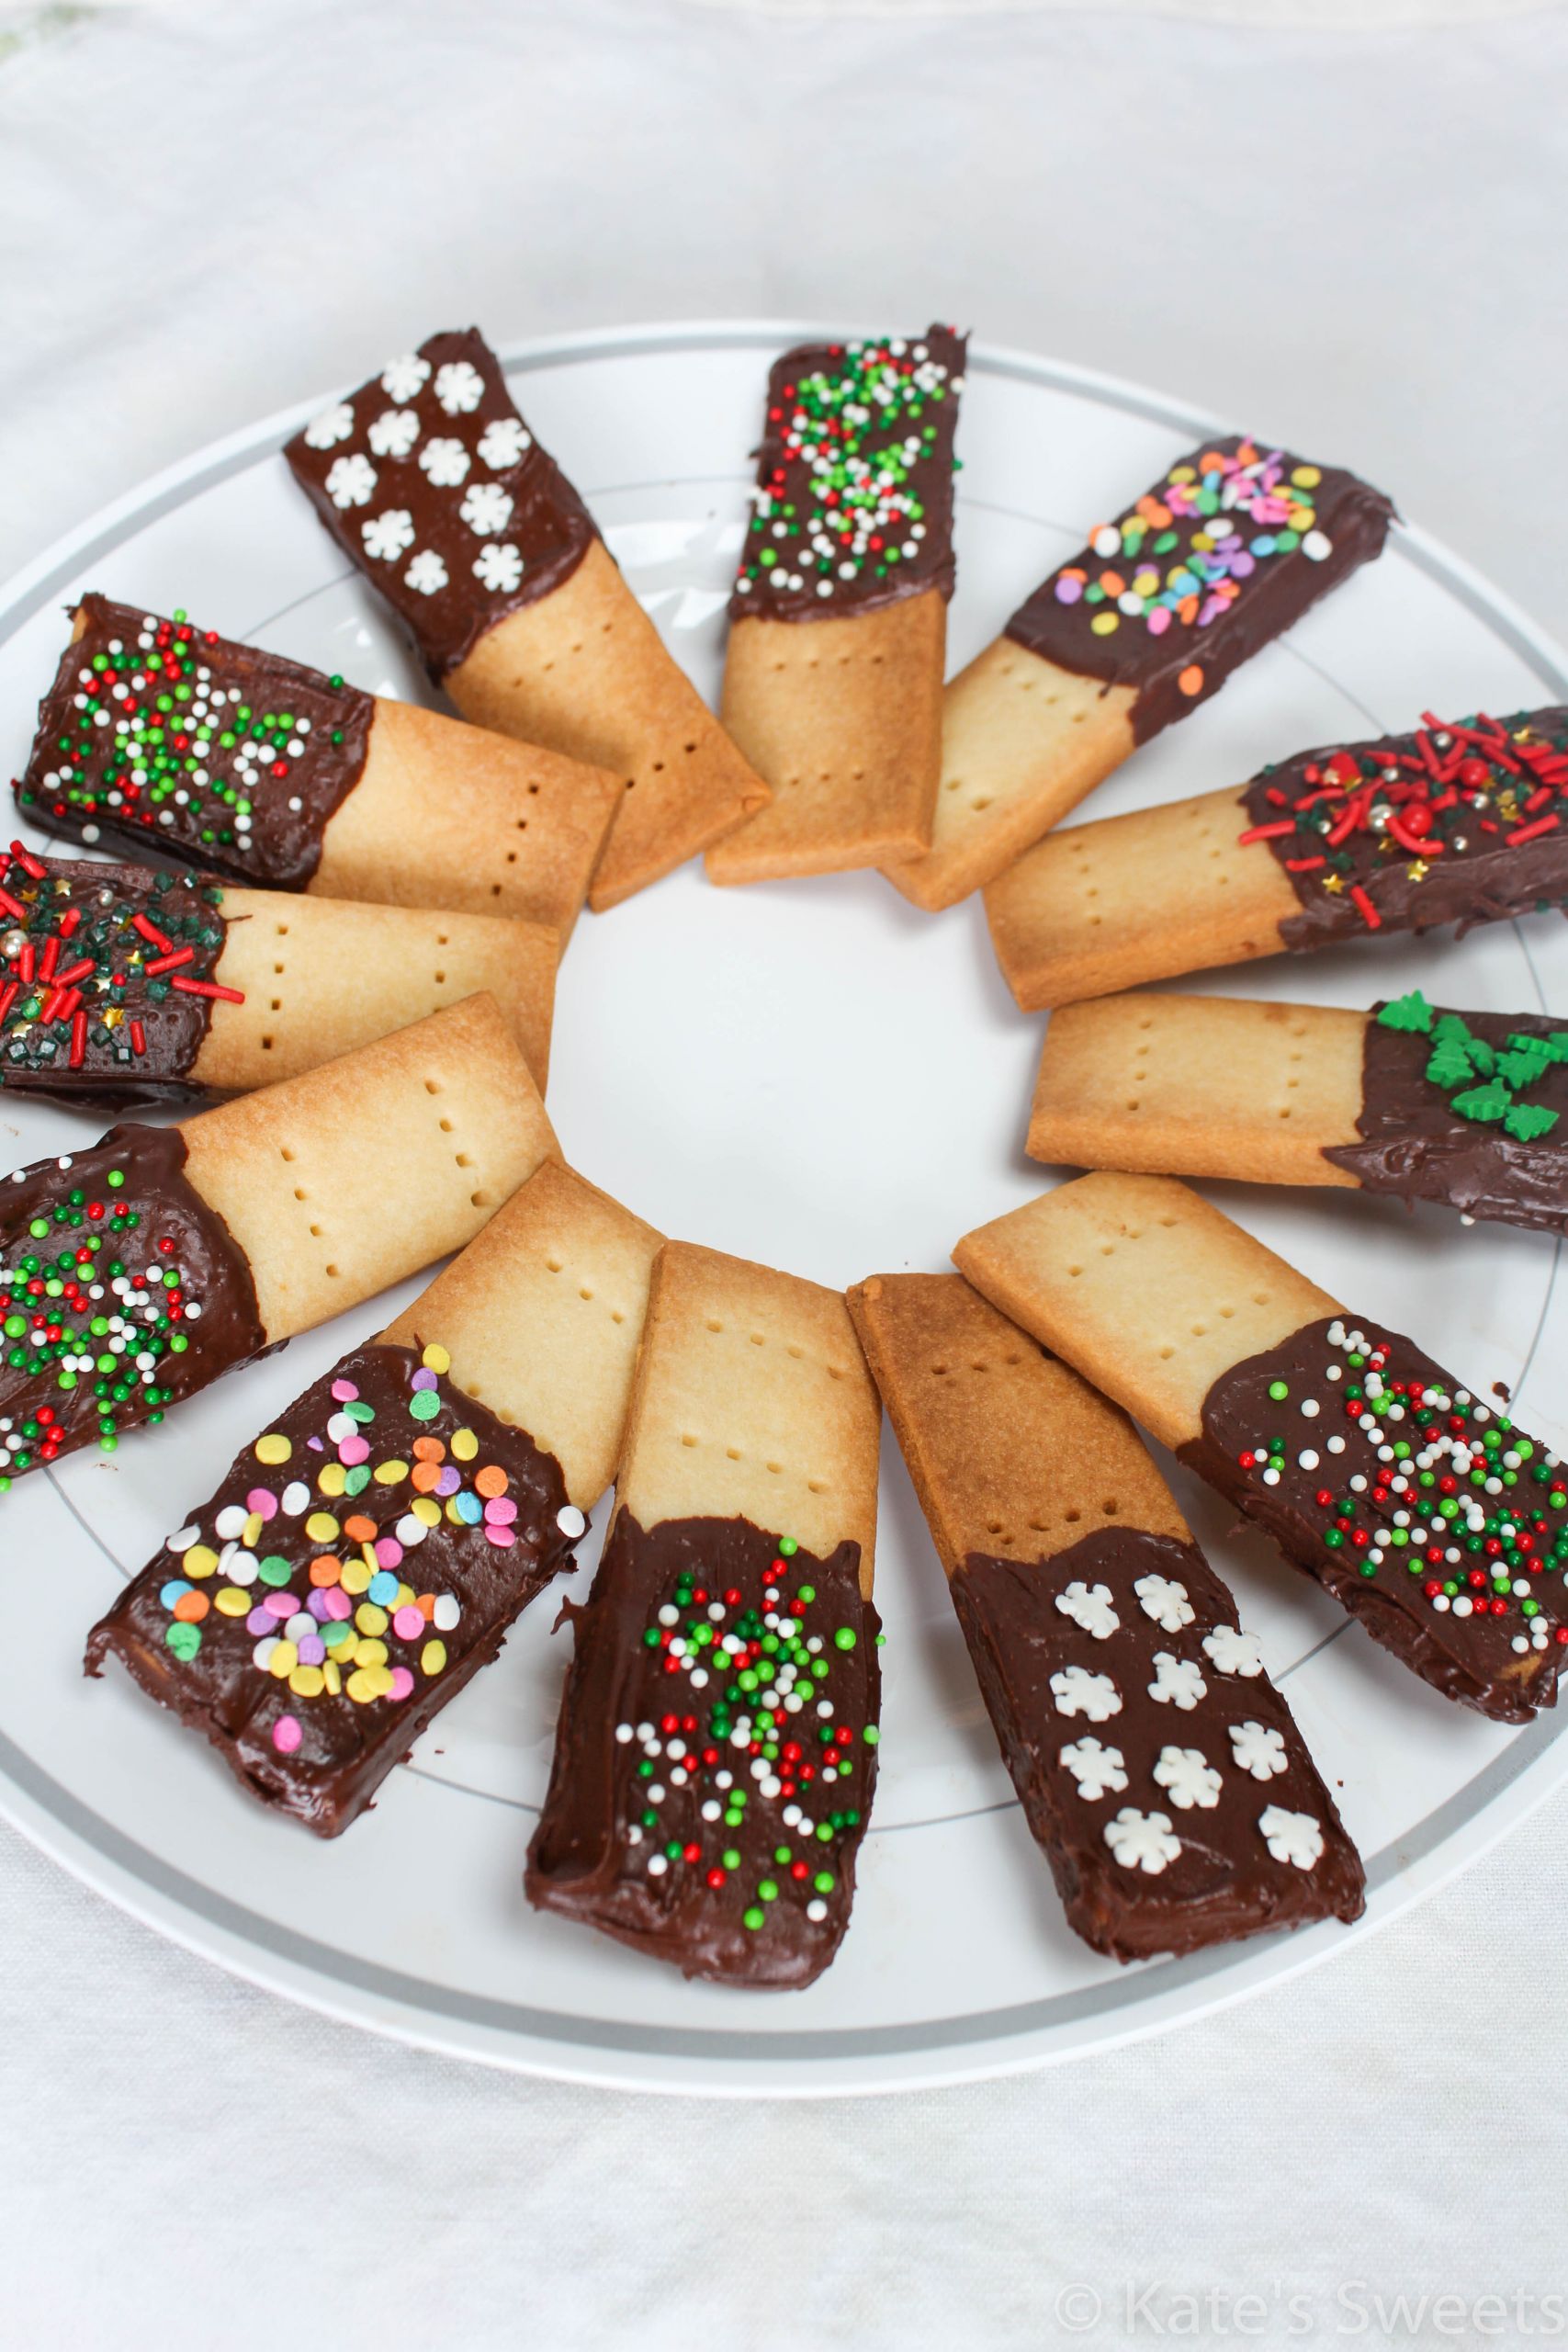 Shortbread Cookies Dipped In Chocolate
 Chocolate Dipped Shortbread Cookies Kate s Sweets